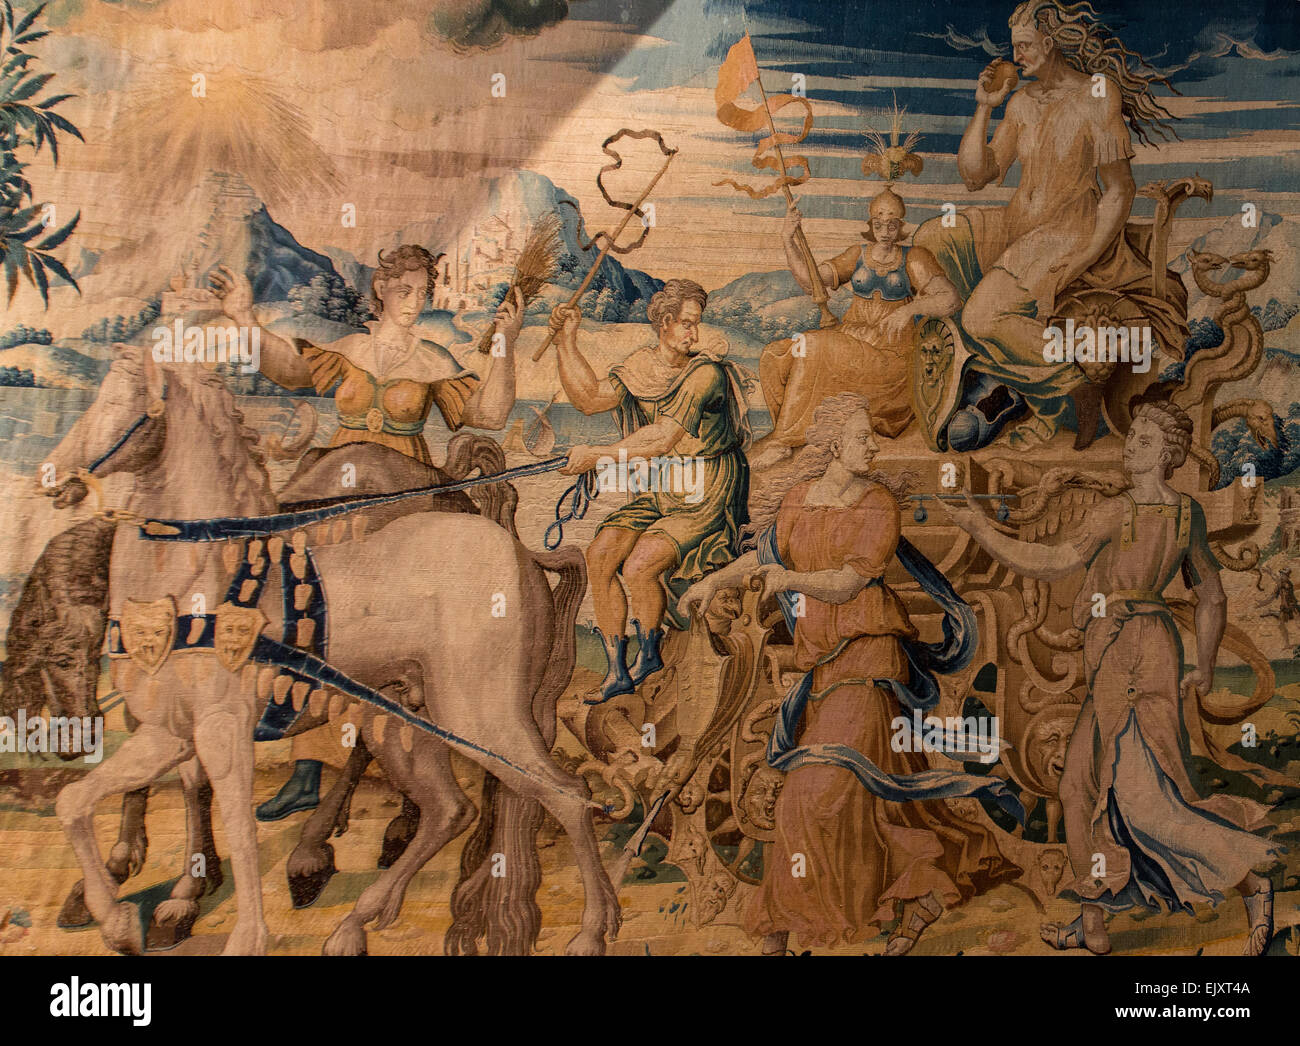 ActiveMuseum 0005755.jpg / Triumph of envy, Mother of war, according to the model of Martin Van Heemskerck. The mother of war occupying the chariot of inequality, leads by the horses 'Defamation' and 'Slander' 05/12/2013  -   / 16th century Collection / Active Museum Stock Photo